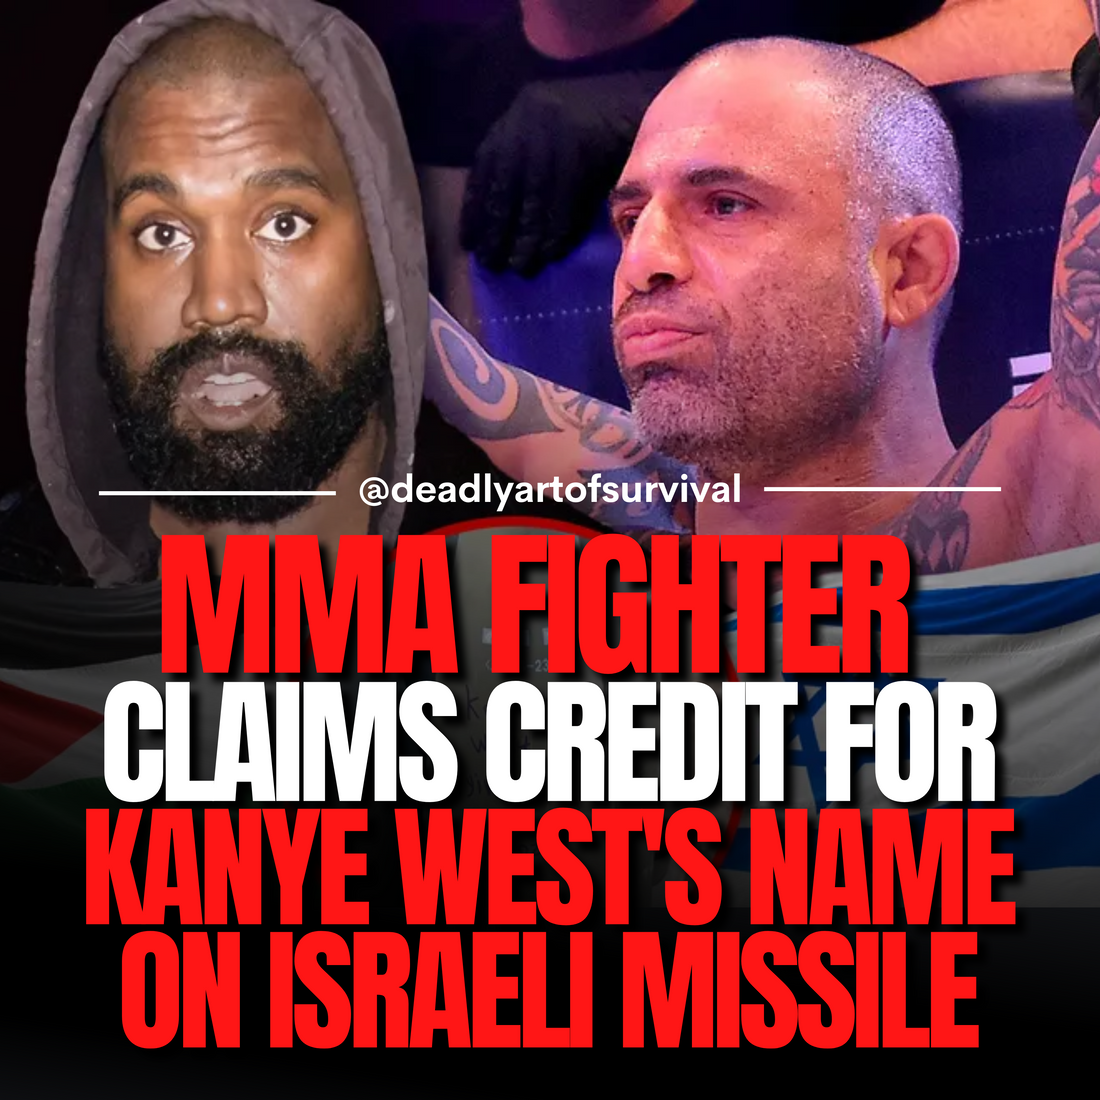 Kanye West's Name on Israeli Missile, MMA Fighter Claims Credit